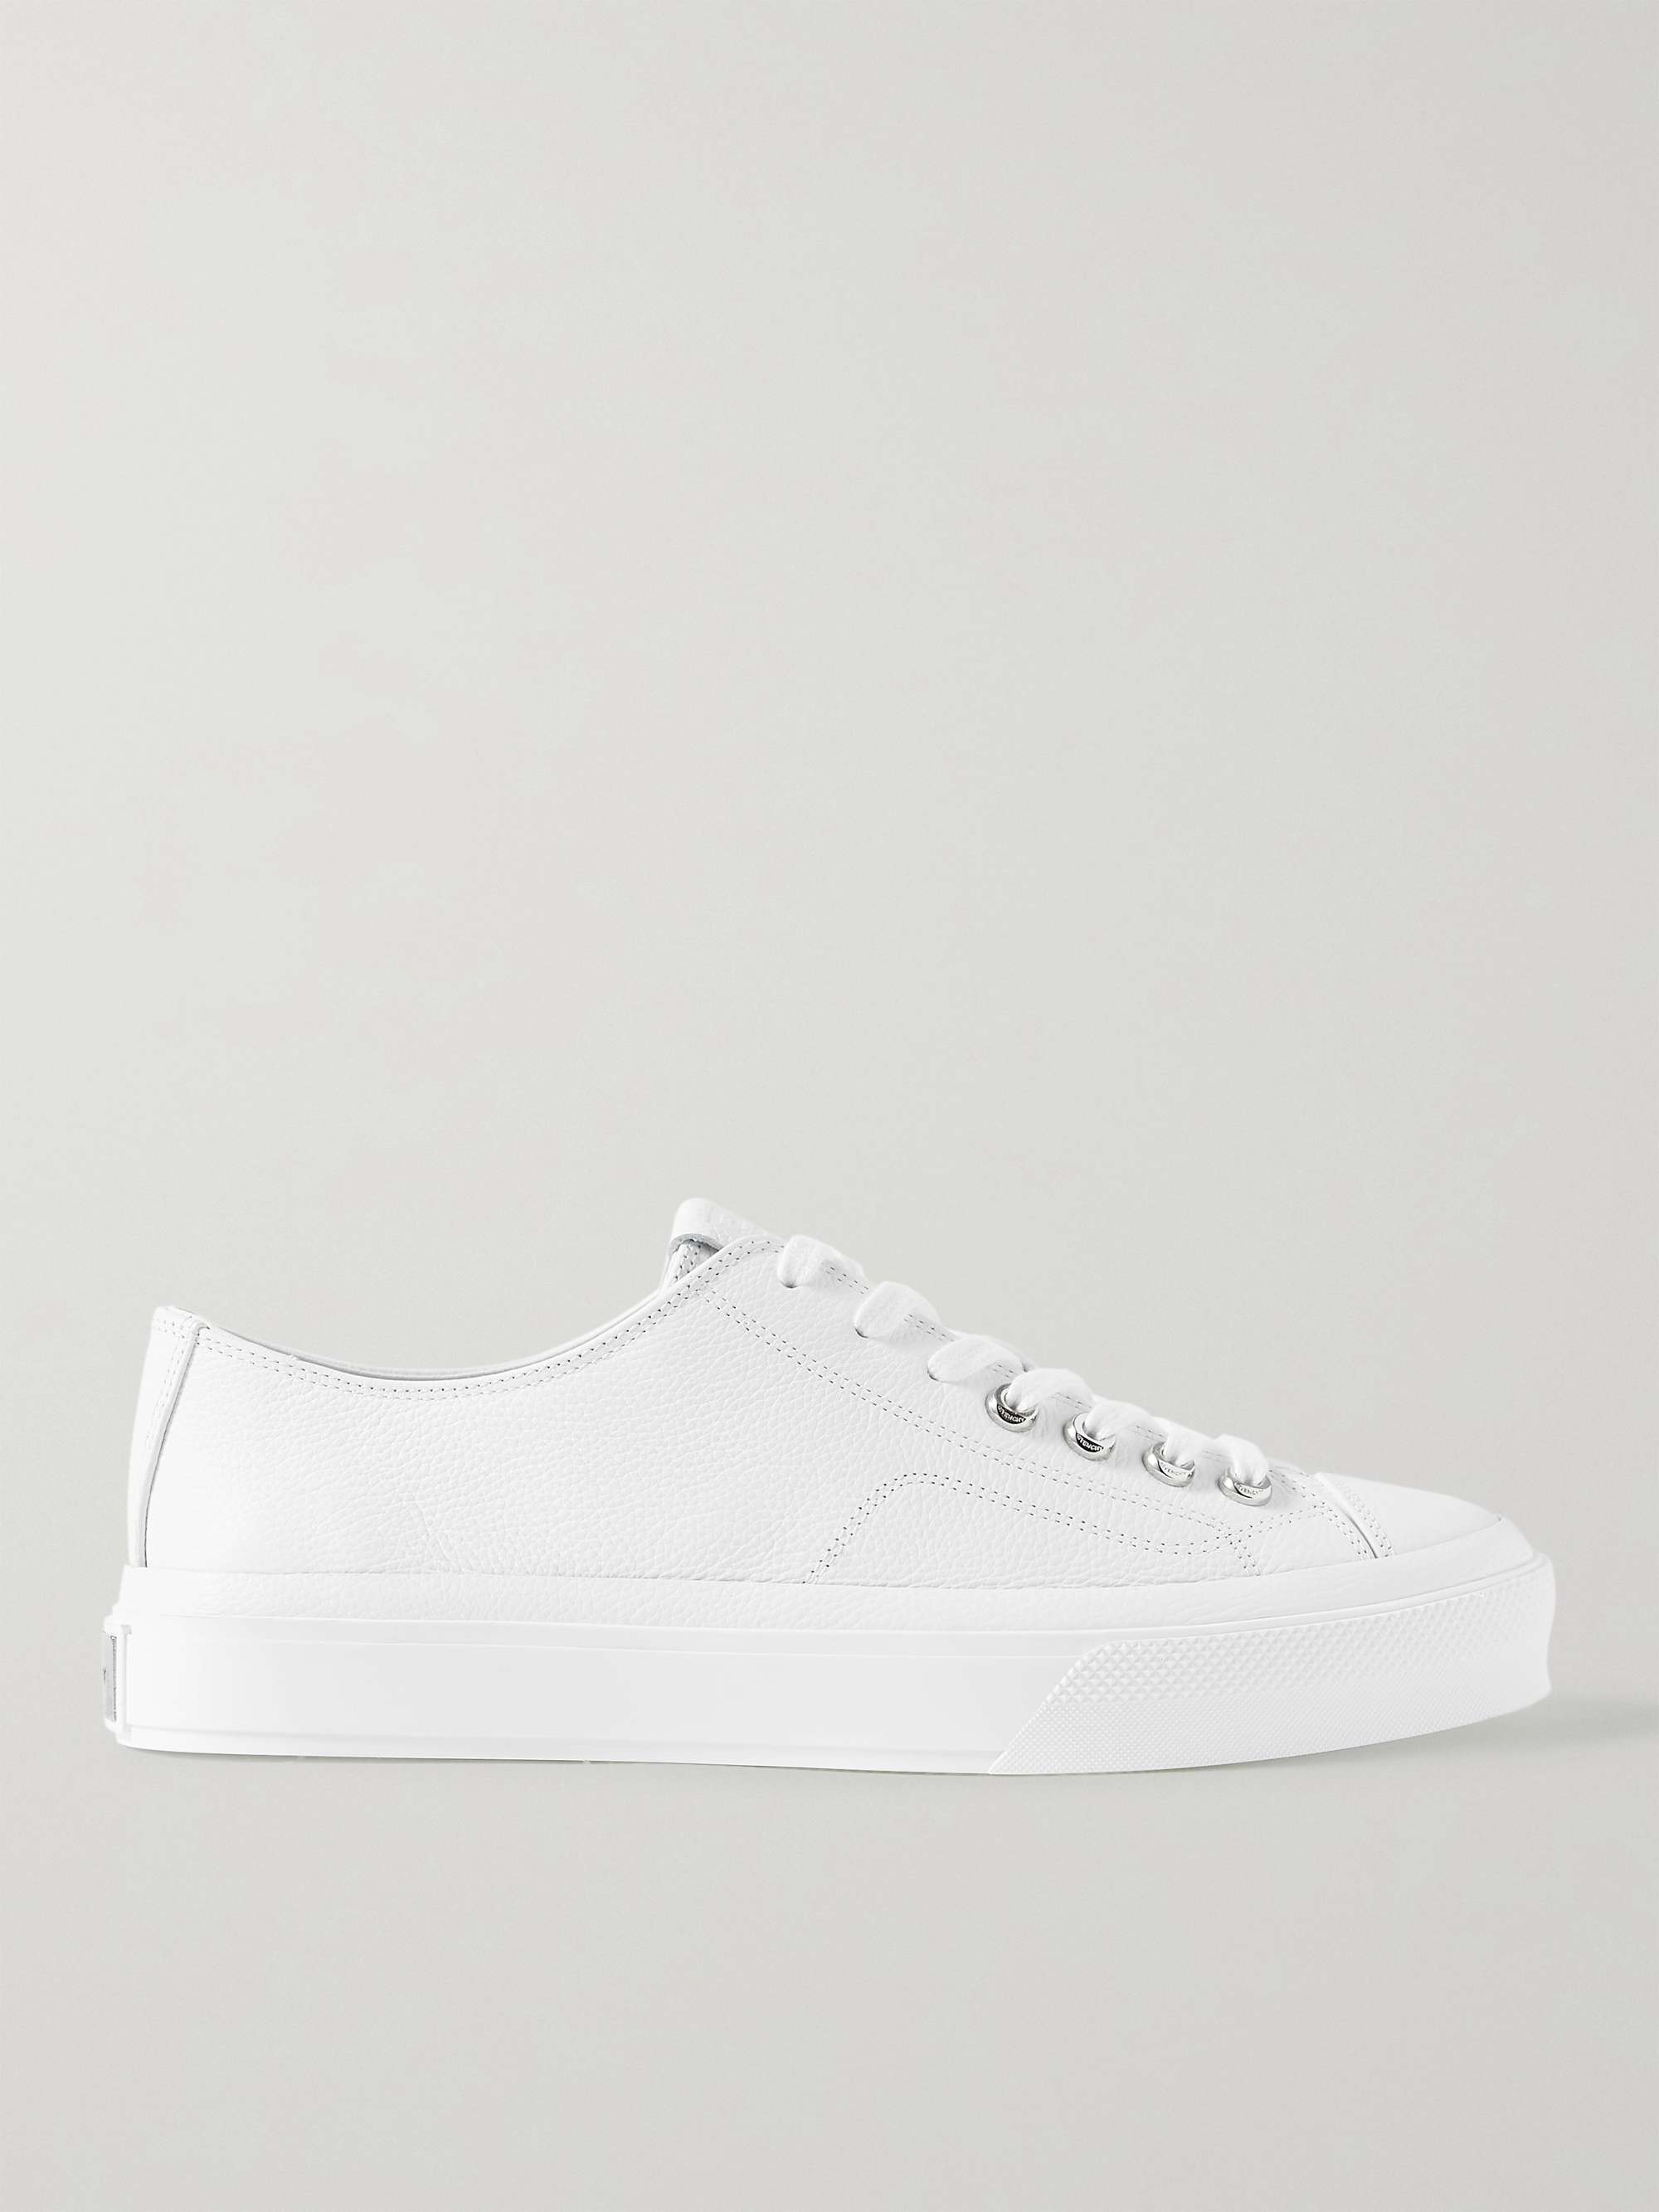 White + Chito Giv 1 Logo-Print Leather Sneakers | GIVENCHY | MR PORTER